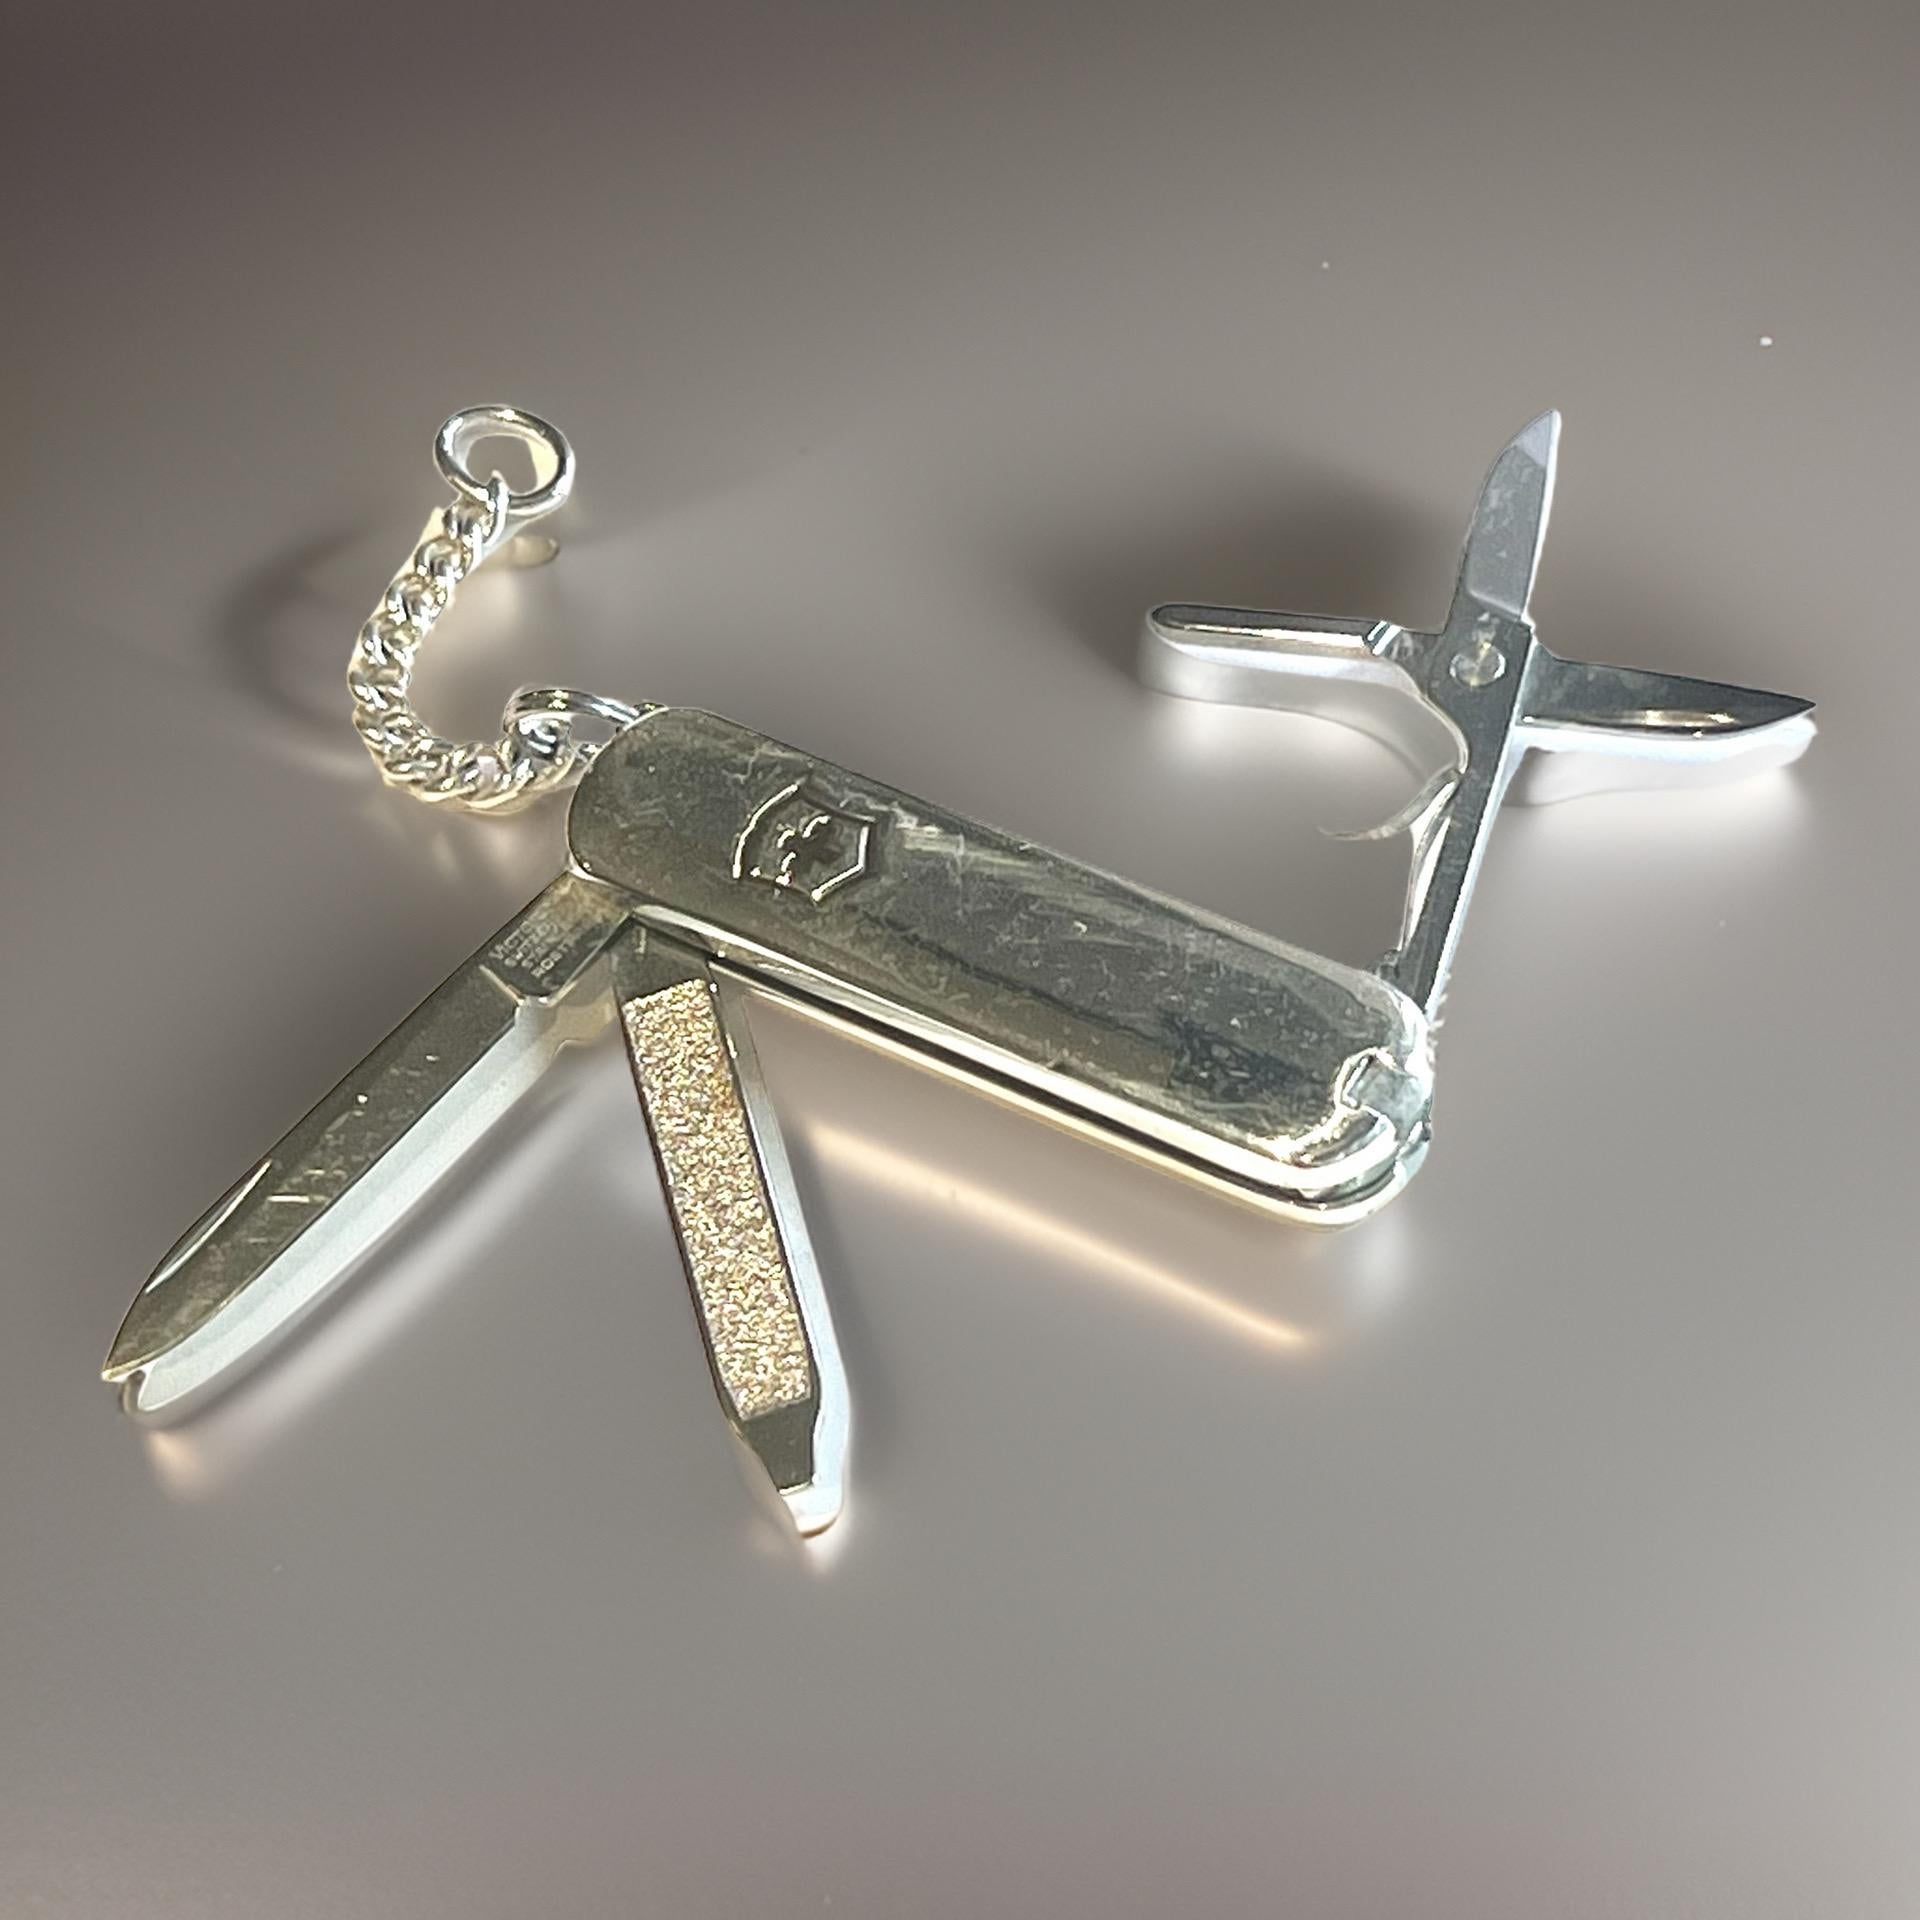 Authentic Tiffany & Co Estate Pocket Knife with Key chain 18k Silver TIF600

This elegant Authentic Tiffany & Co pocket knife is made of sterling silver & 18k yellow gold.


TRUSTED SELLER SINCE 2002

PLEASE SEE OUR HUNDREDS OF POSITIVE FEEDBACKS